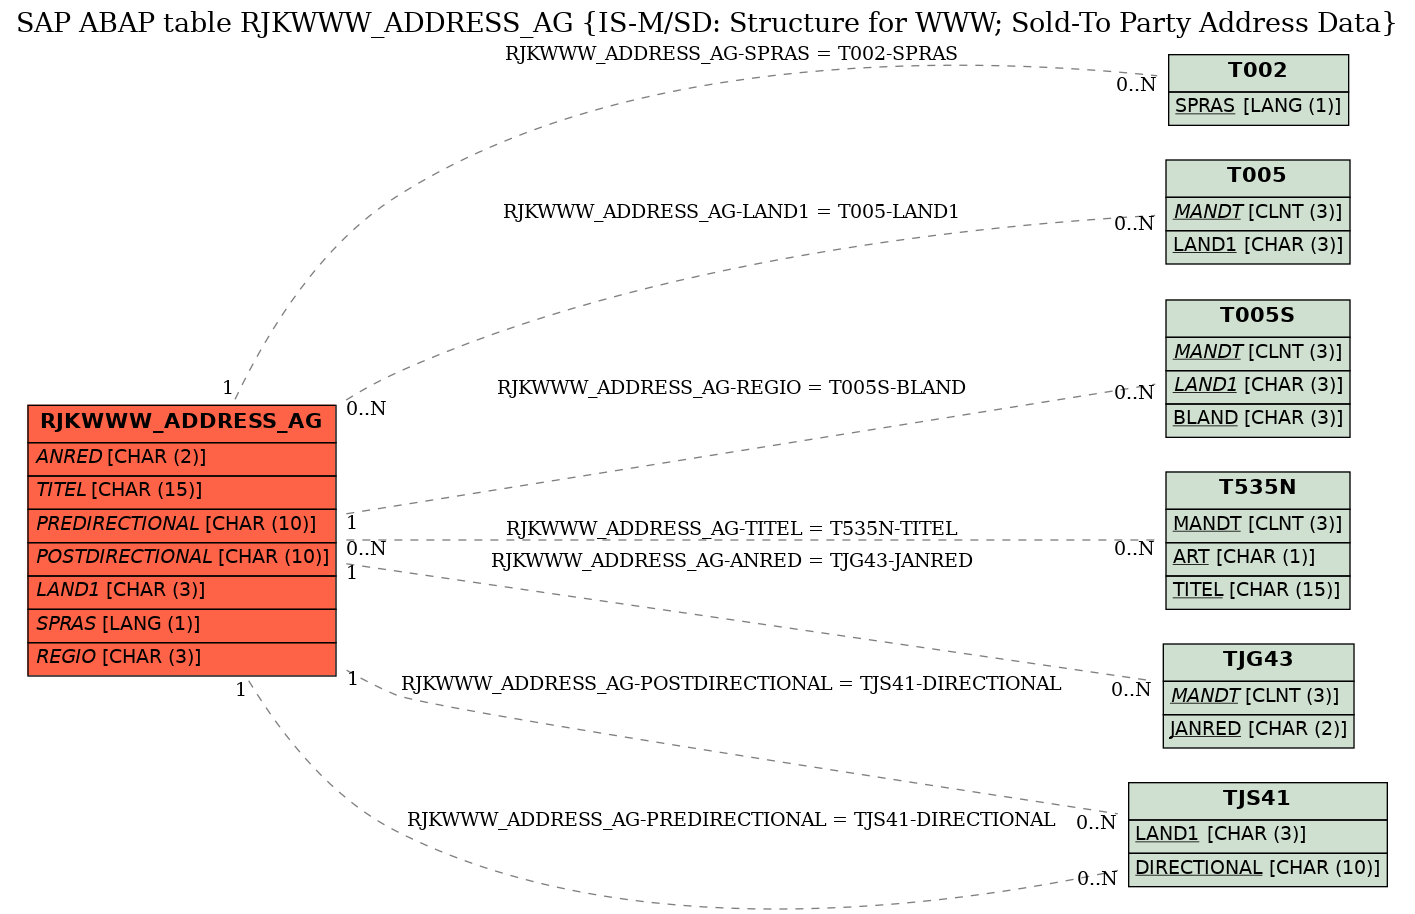 E-R Diagram for table RJKWWW_ADDRESS_AG (IS-M/SD: Structure for WWW; Sold-To Party Address Data)